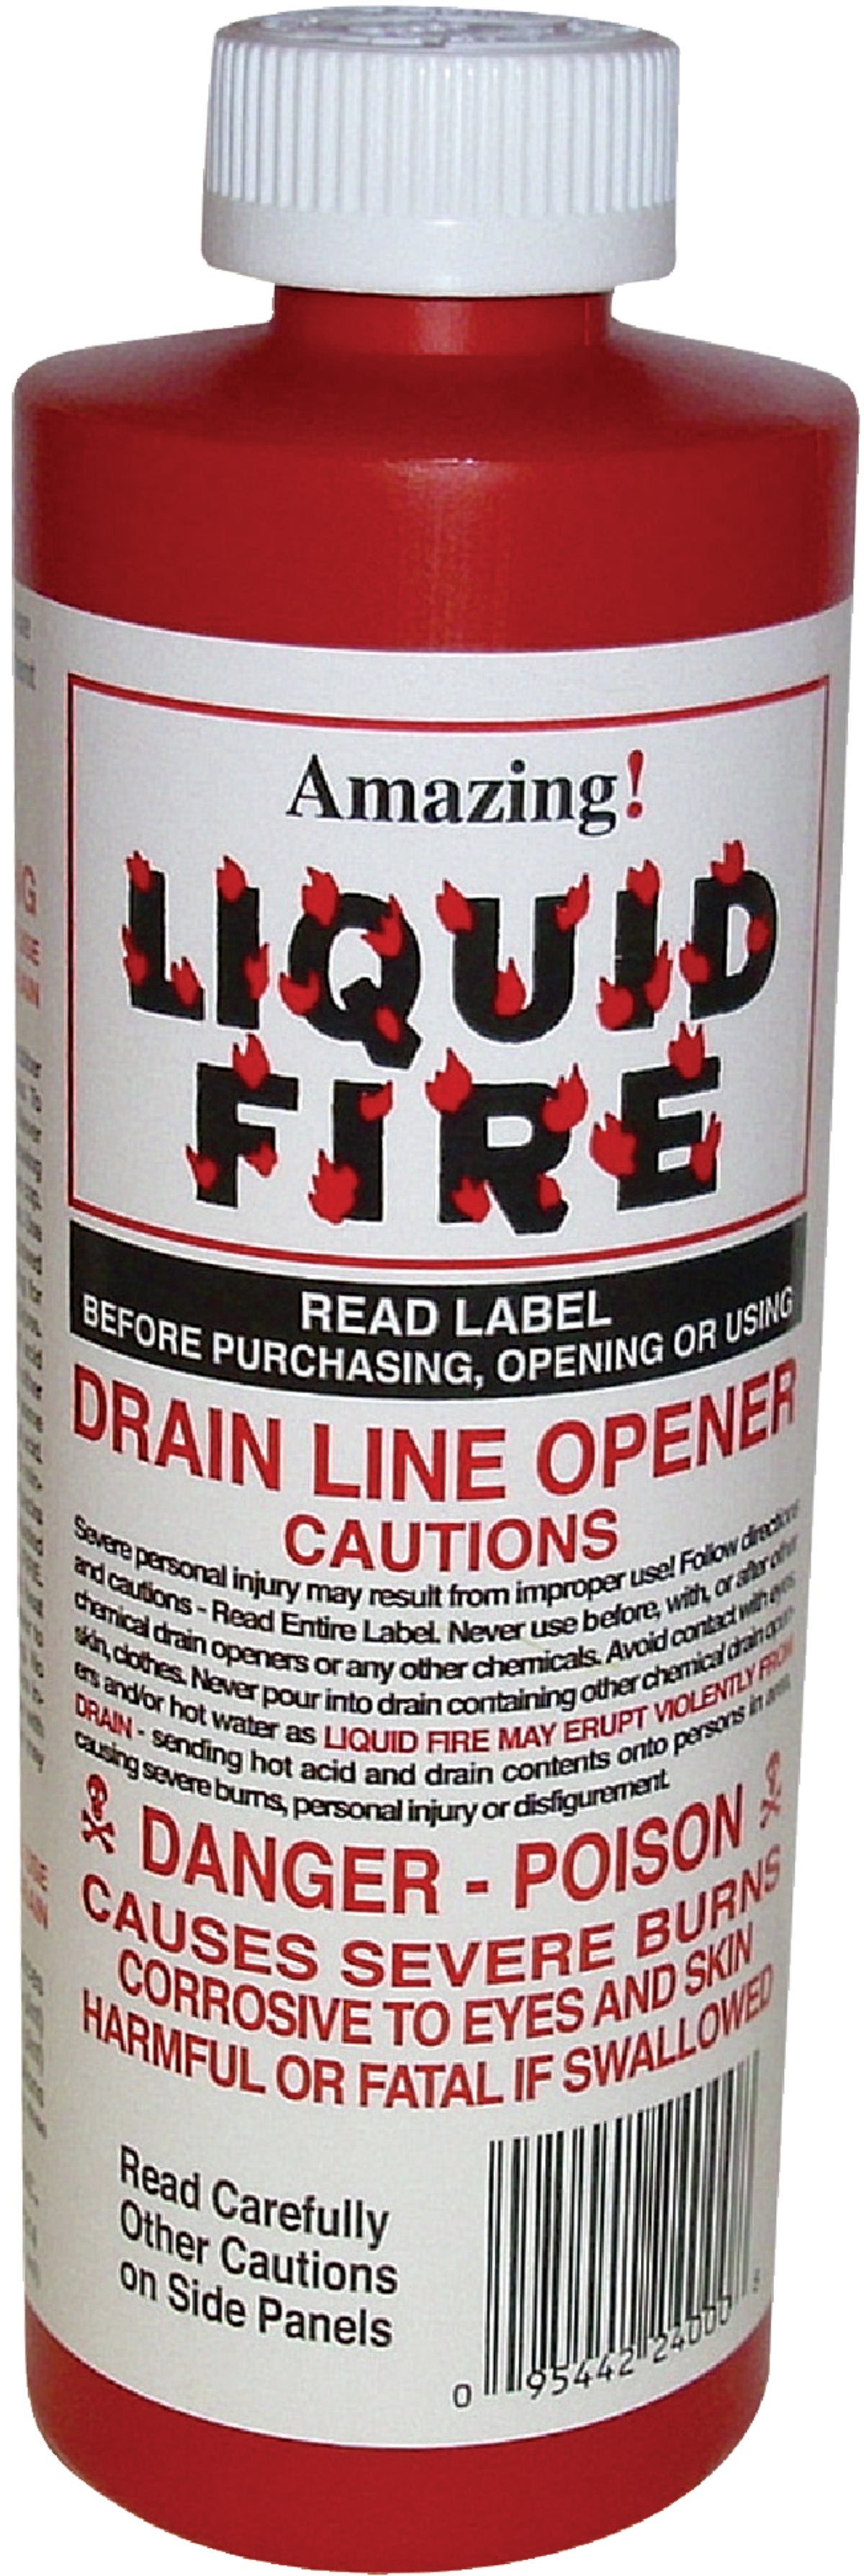  Liquid Fire liquid fire drain line opener in Sinks Tubs Shower  Stalls Septic Tanks and Laterals-Clog Remover Drain Cleaner Toilet Clog  Remover-16 OZ with Centaurus AZ Drain Snake : Health 